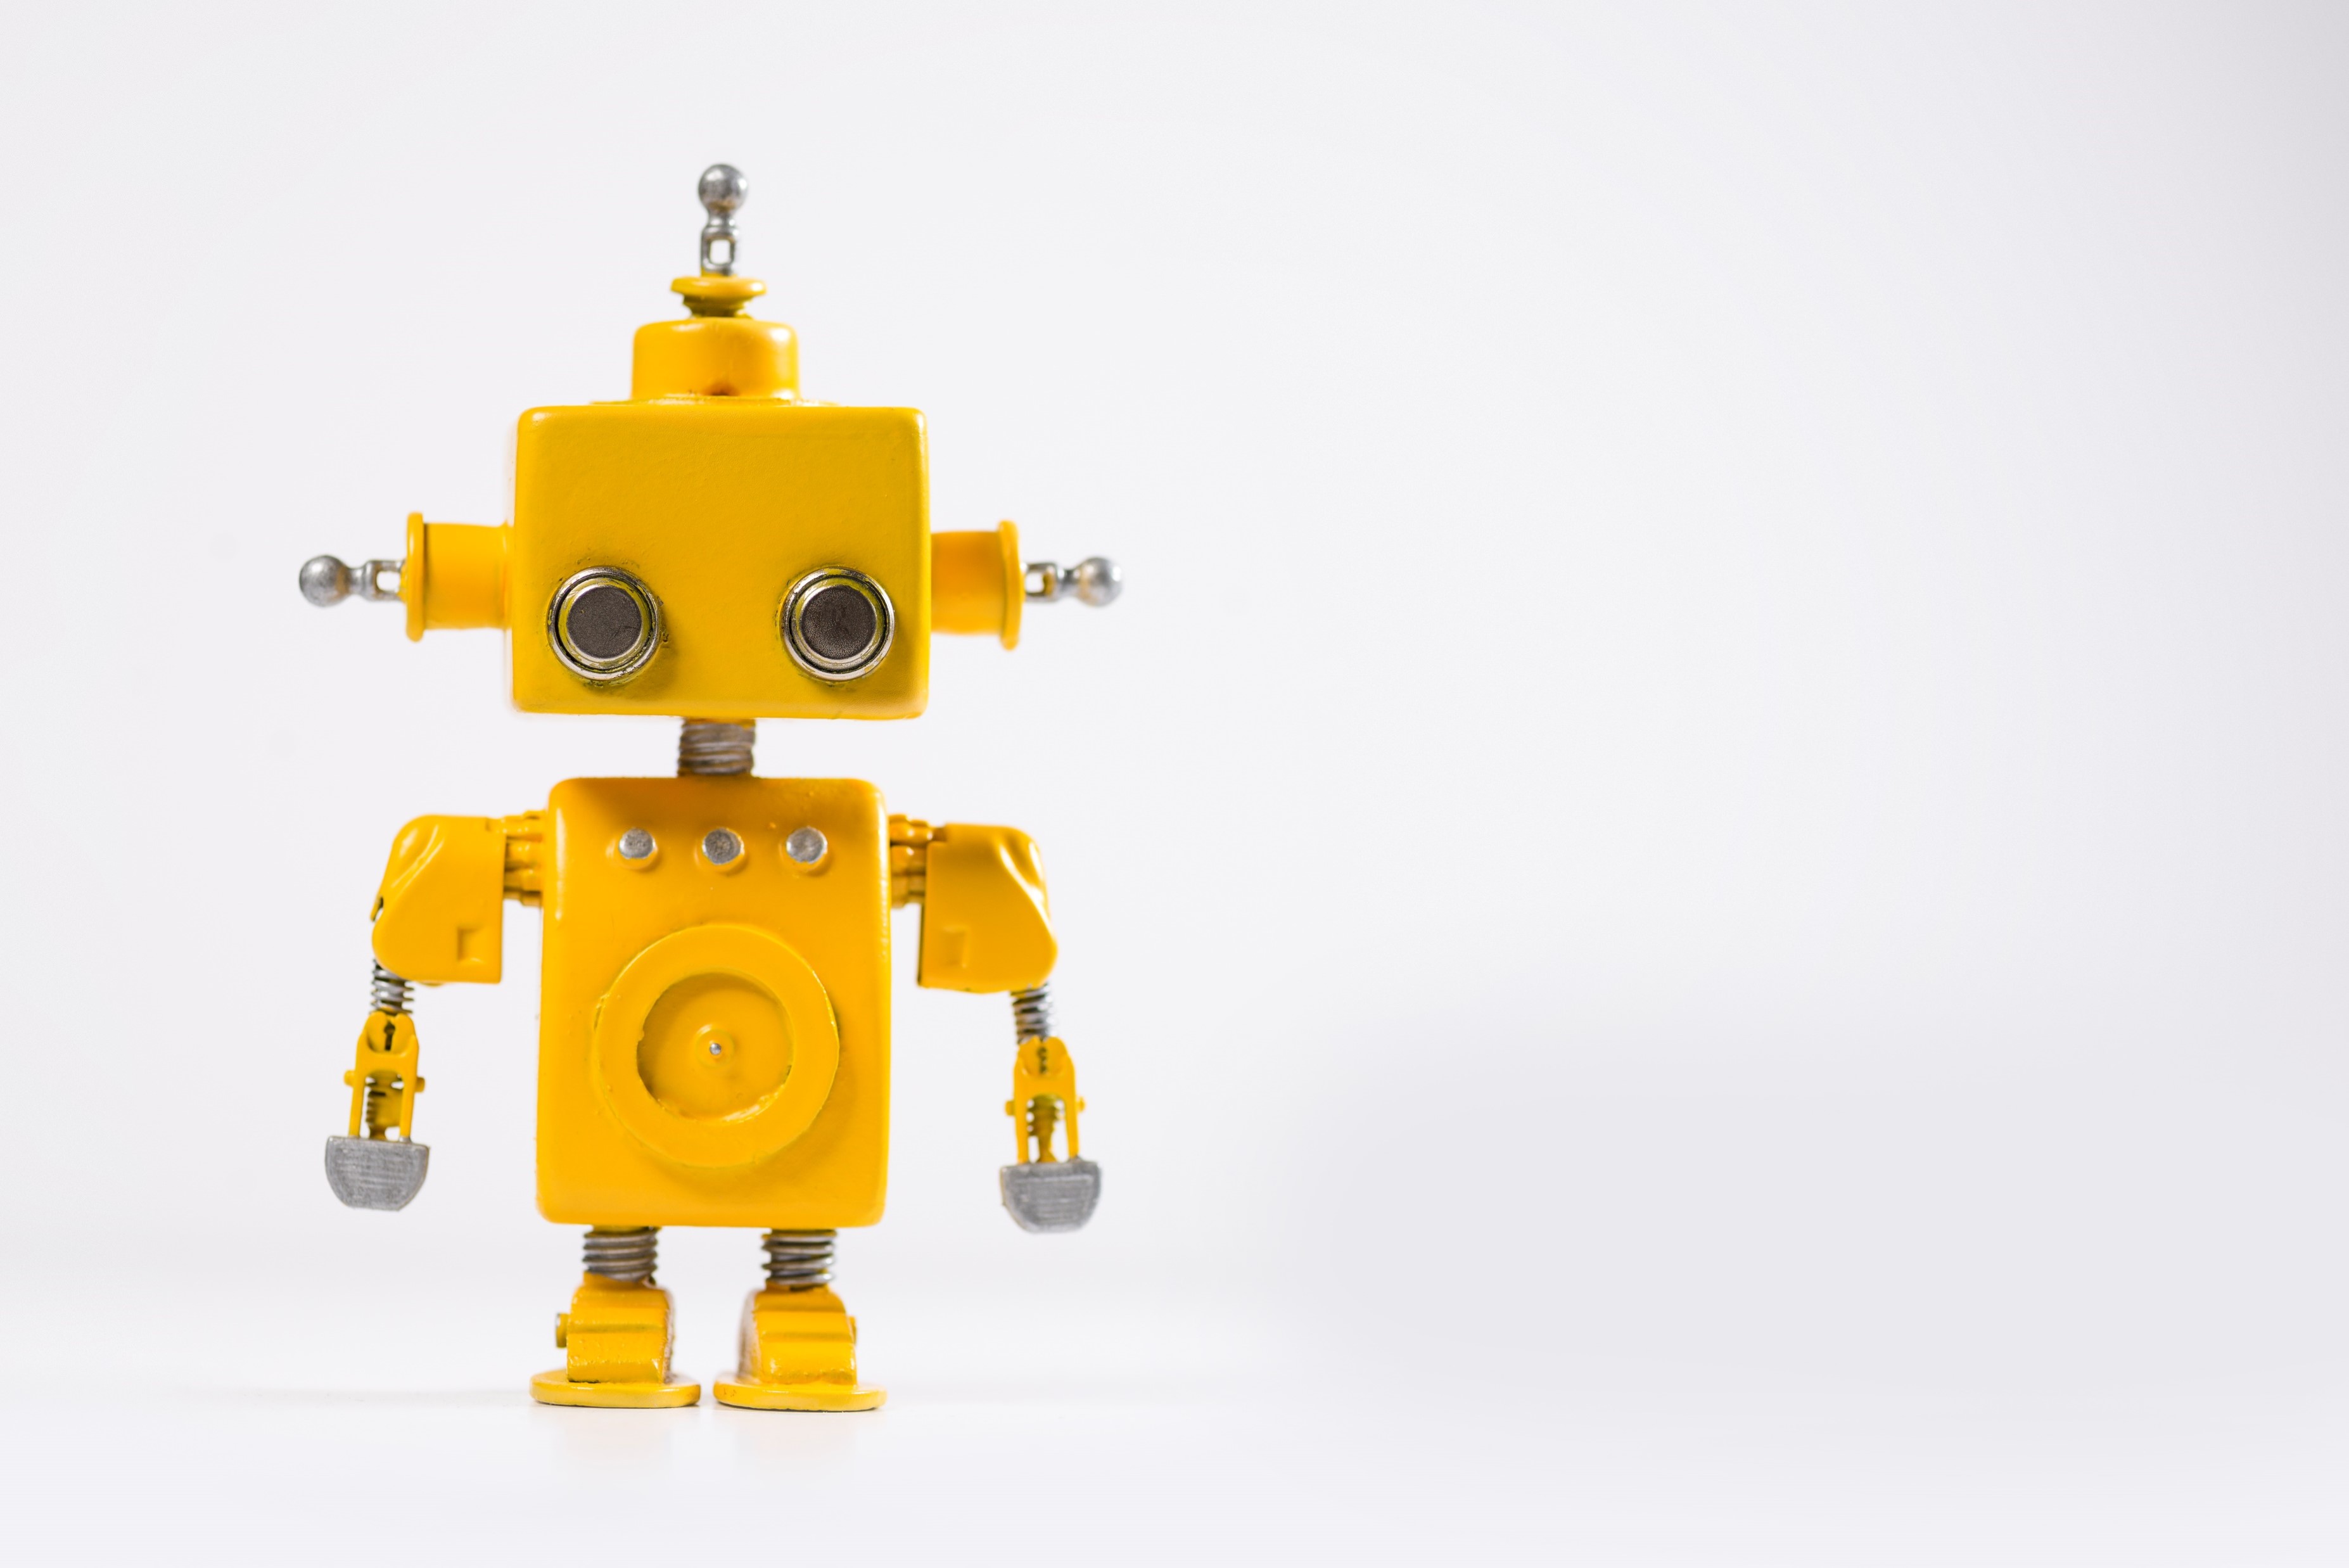 Little yellow toy robot